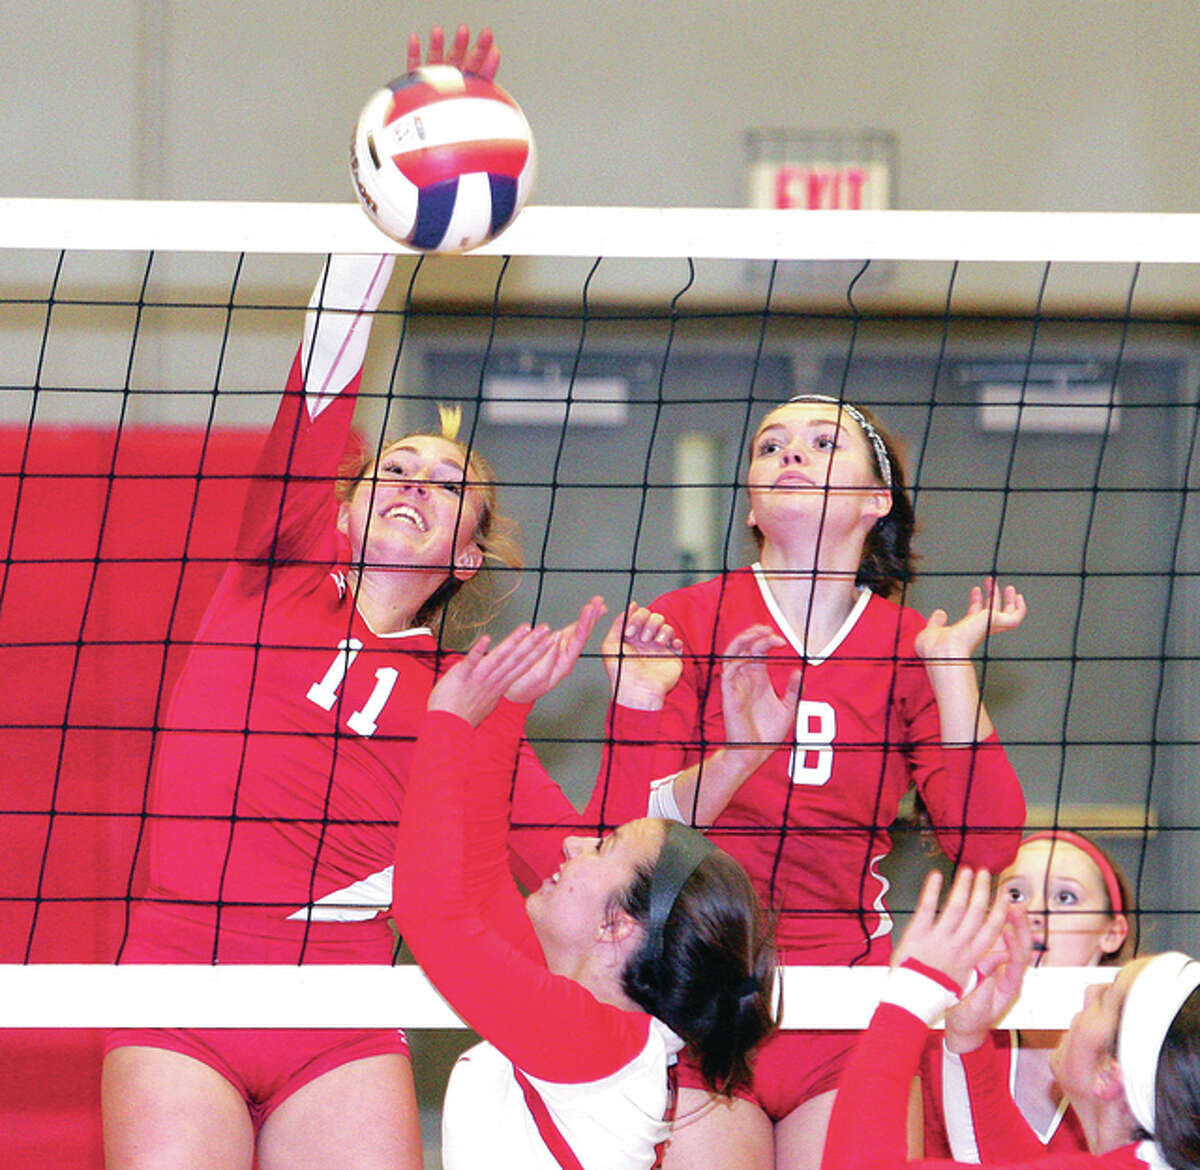 Alton senior Annie Evans, left, records a kill Monday night against Chatham Glenwood the Alton Class 4A Regional at Alton High in Godfrey. At right is Alton’s Saddie Brands.